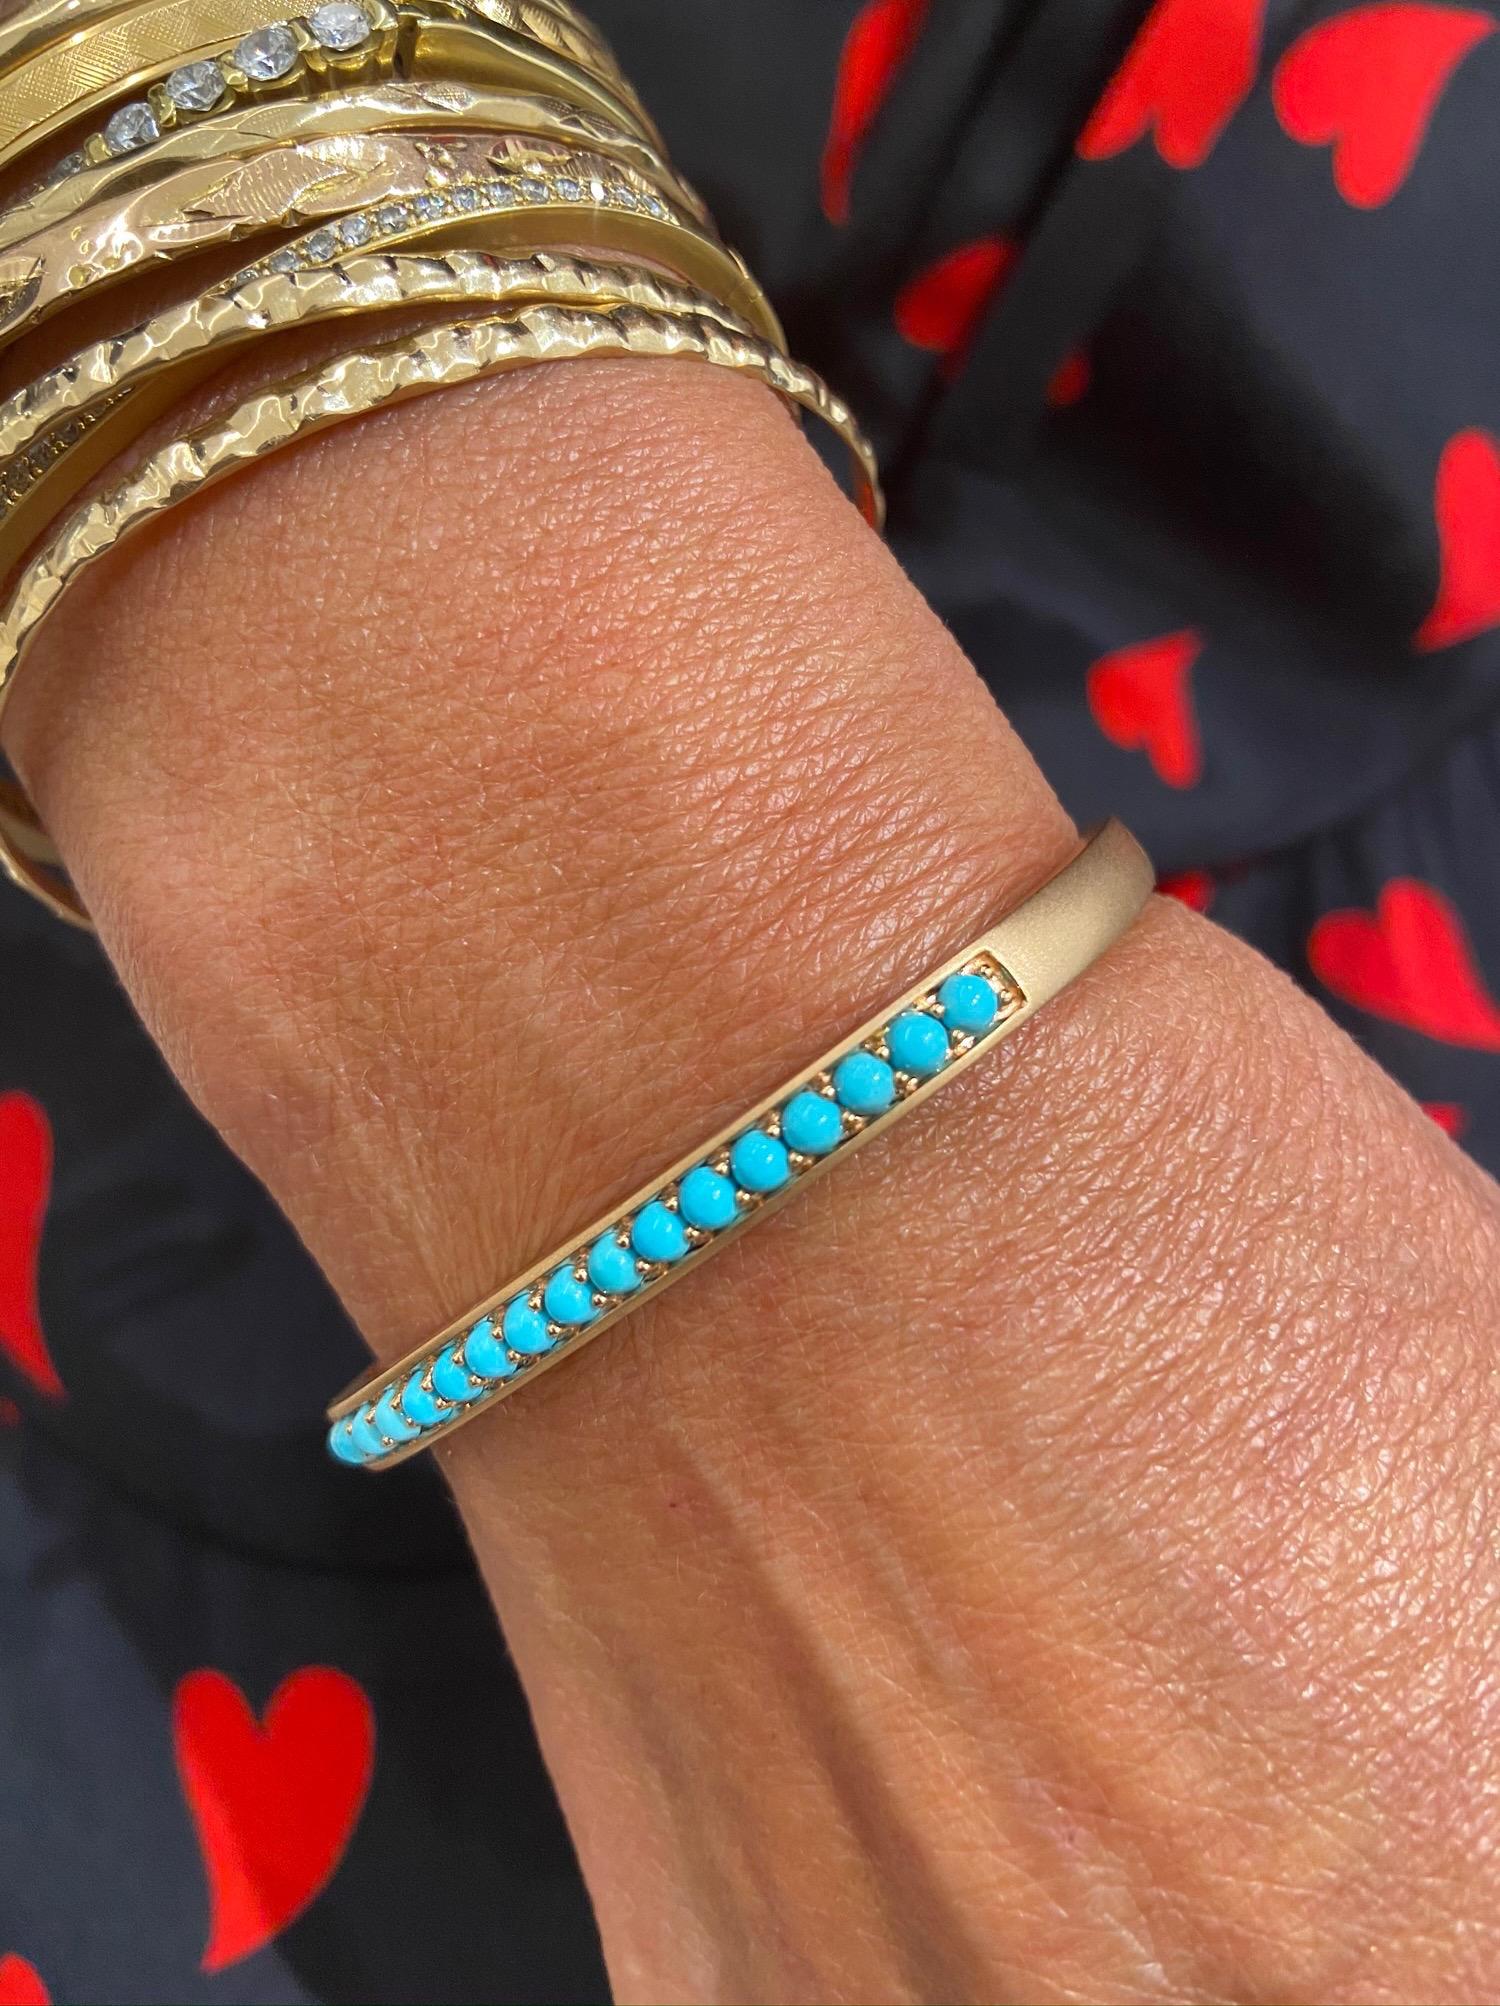 Jane Taylor Jewelry is a family run company focused on creating modern heirlooms since 1994.
This 18 karat rose gold cuff bracelet has a squarish shape and a matte finish. It is set across the top with 17 5mm cabochon Turquoise stones. The bracelet